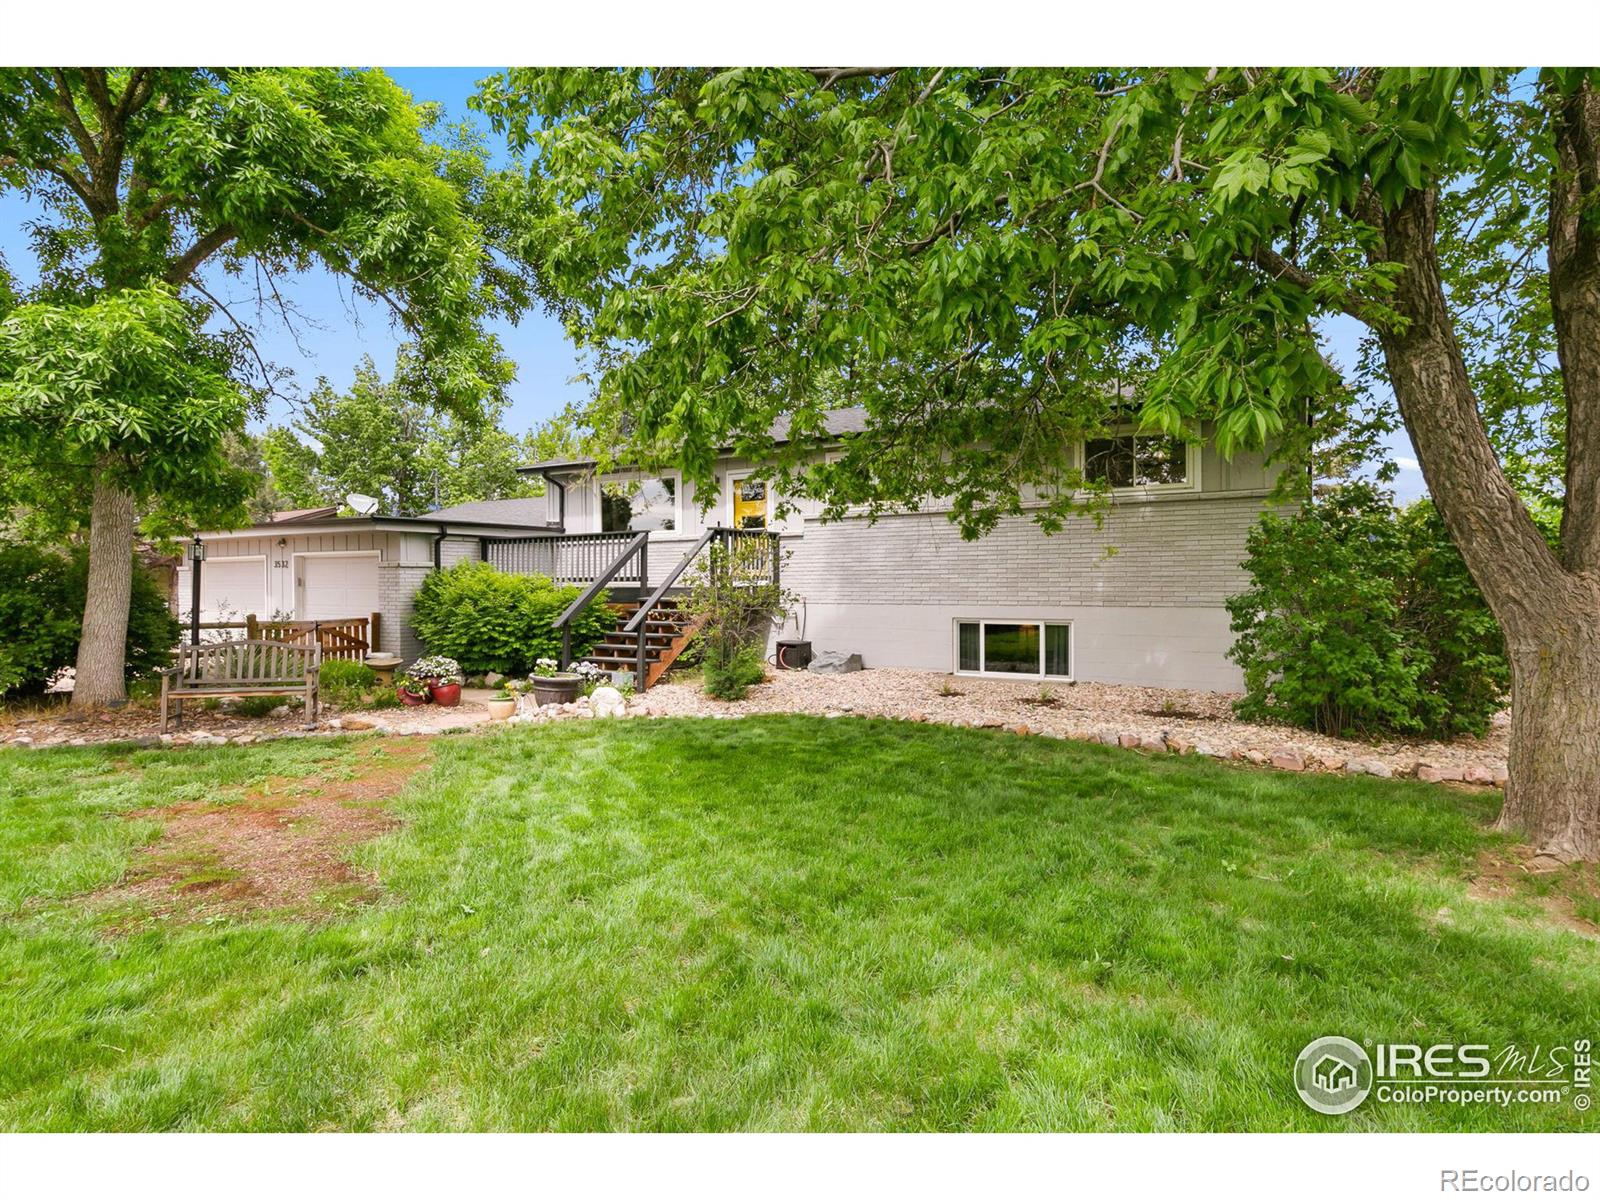 3532  Terry Lake Road, fort collins MLS: 4567891010817 Beds: 4 Baths: 2 Price: $745,000